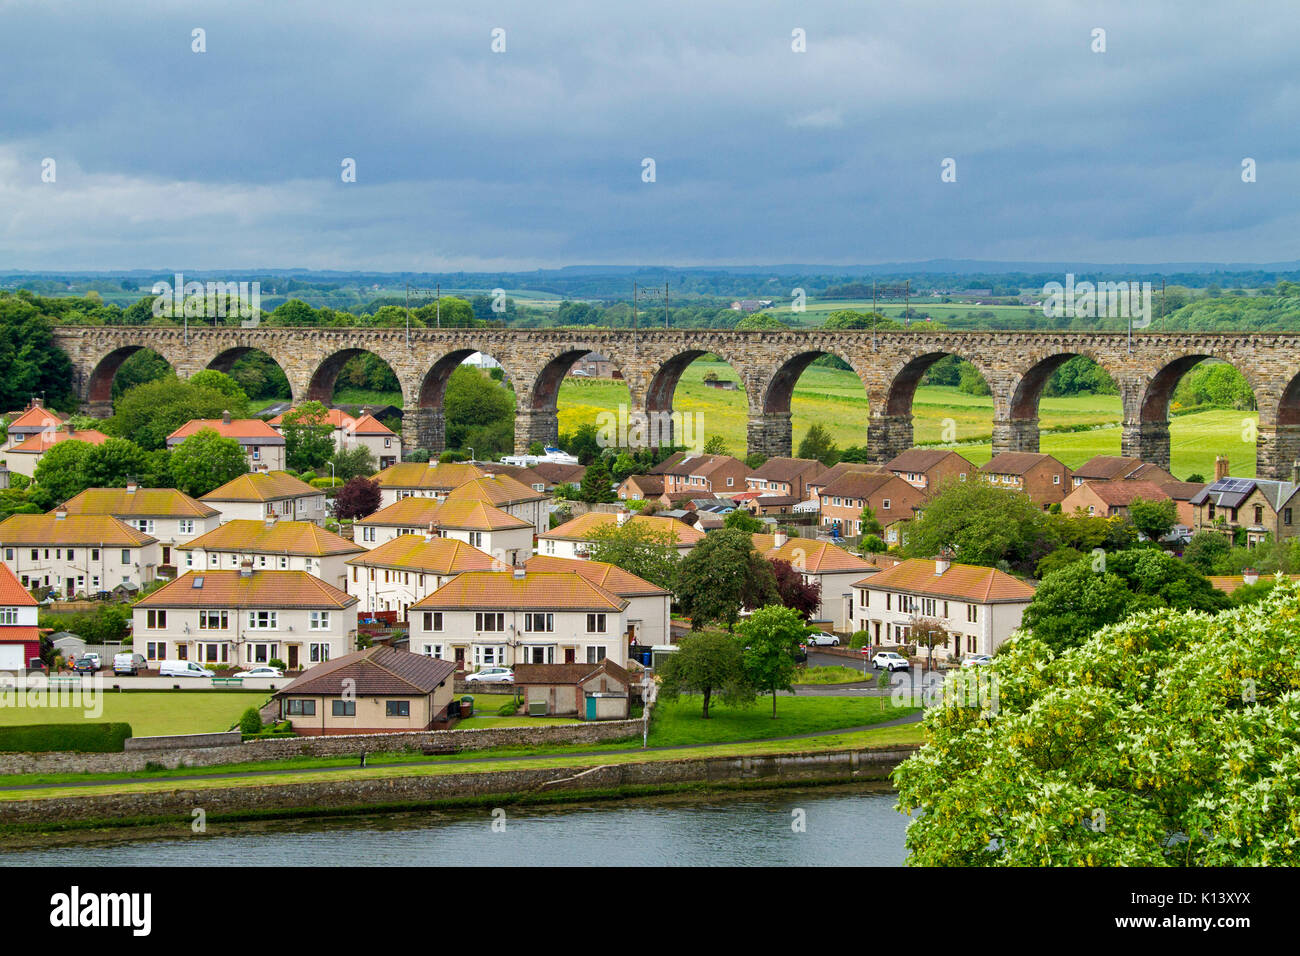 Royal Border Bridge, heritage listed railway viaduct crossing River Tweed at Berwick-upon-Tweed with houses in foreground & emerald fields beyond Stock Photo